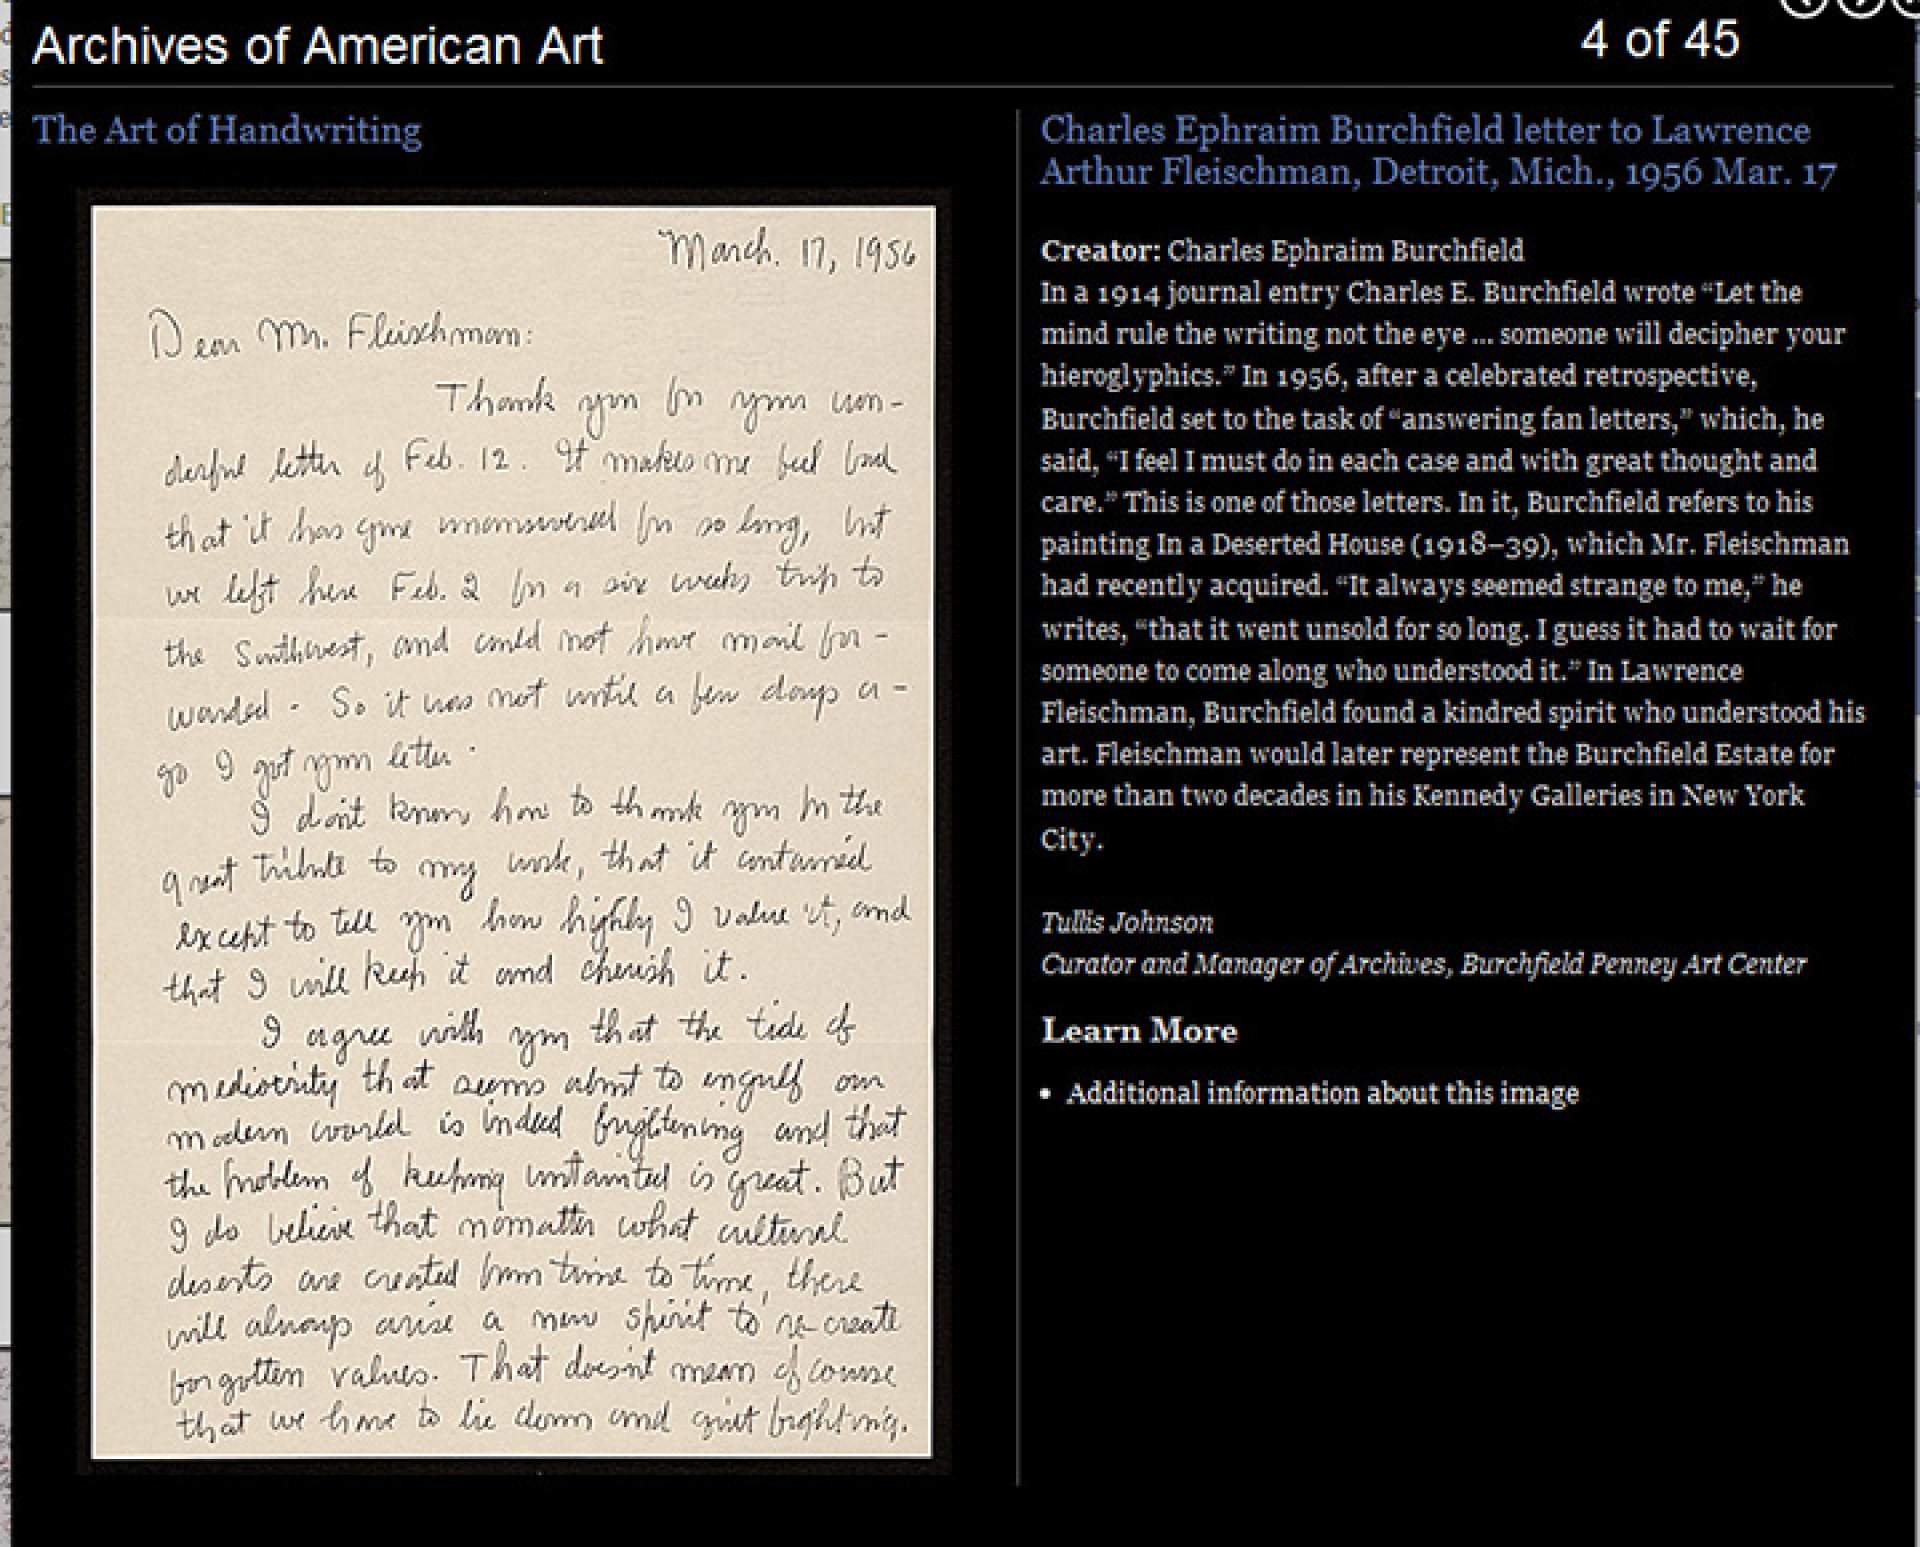 Tullis Johnson contributes to The Art of Handwriting at the Smithsonian Archives of American Art